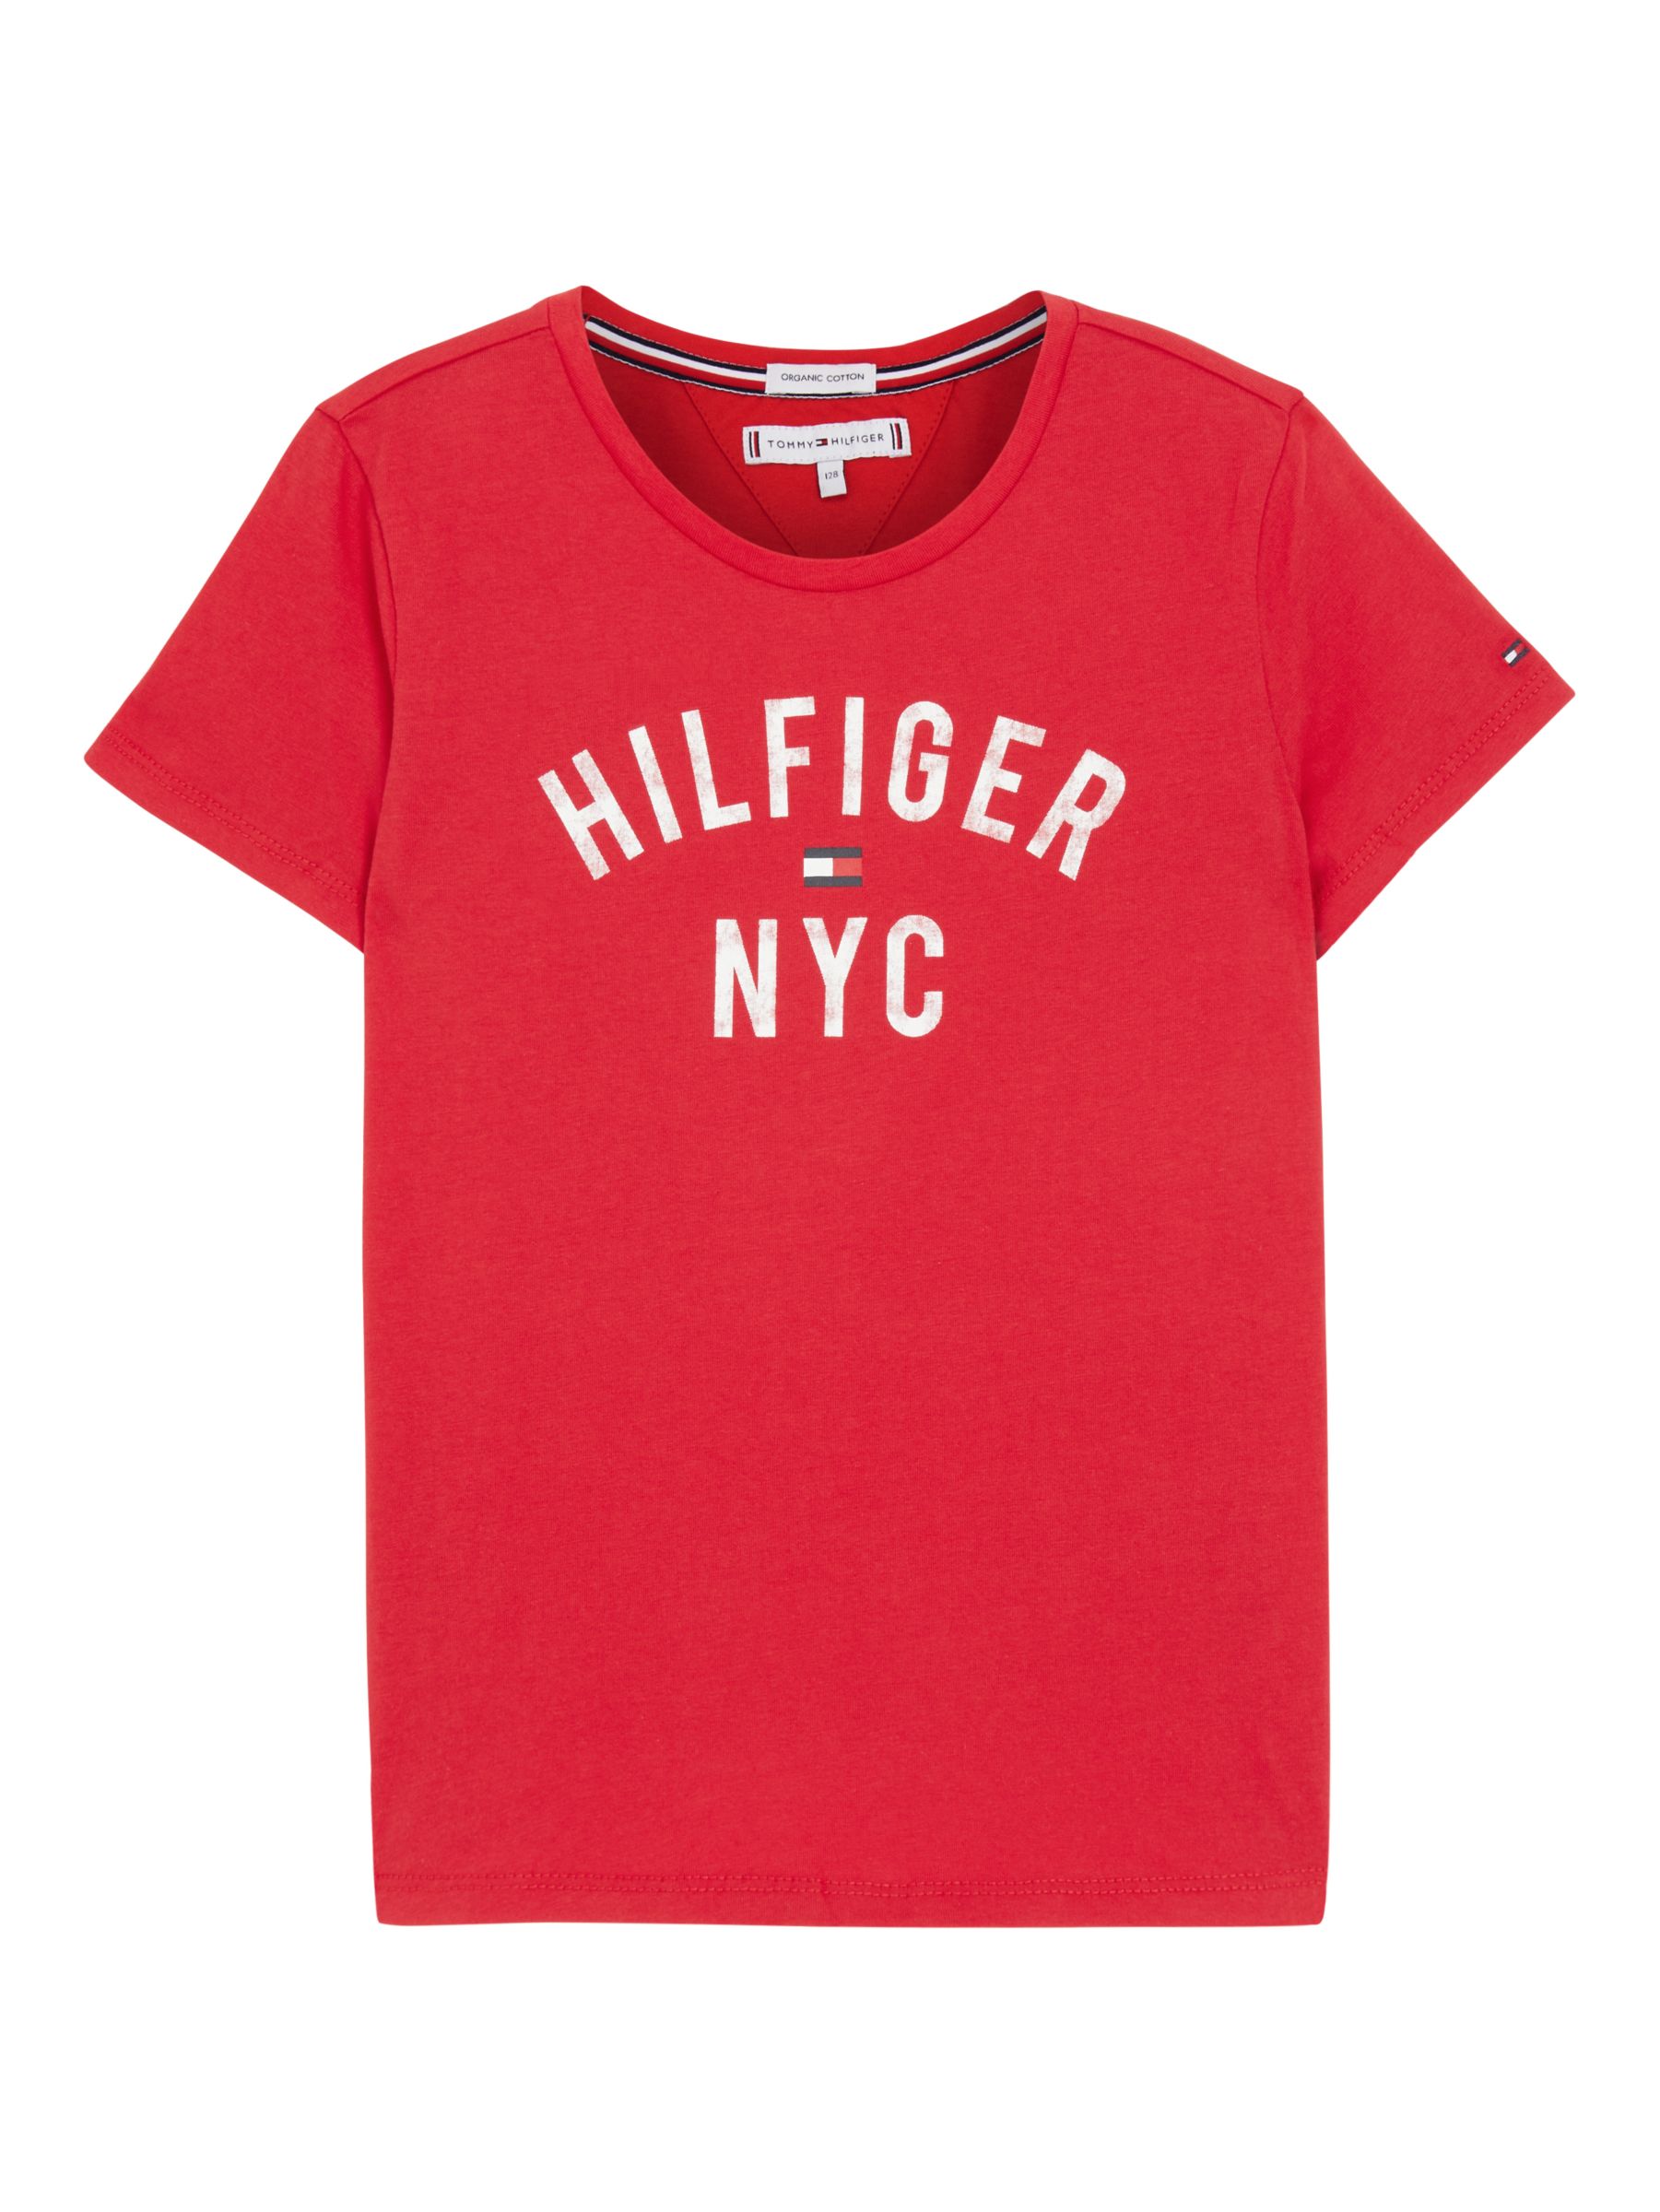 girls tommy hilfiger clothes